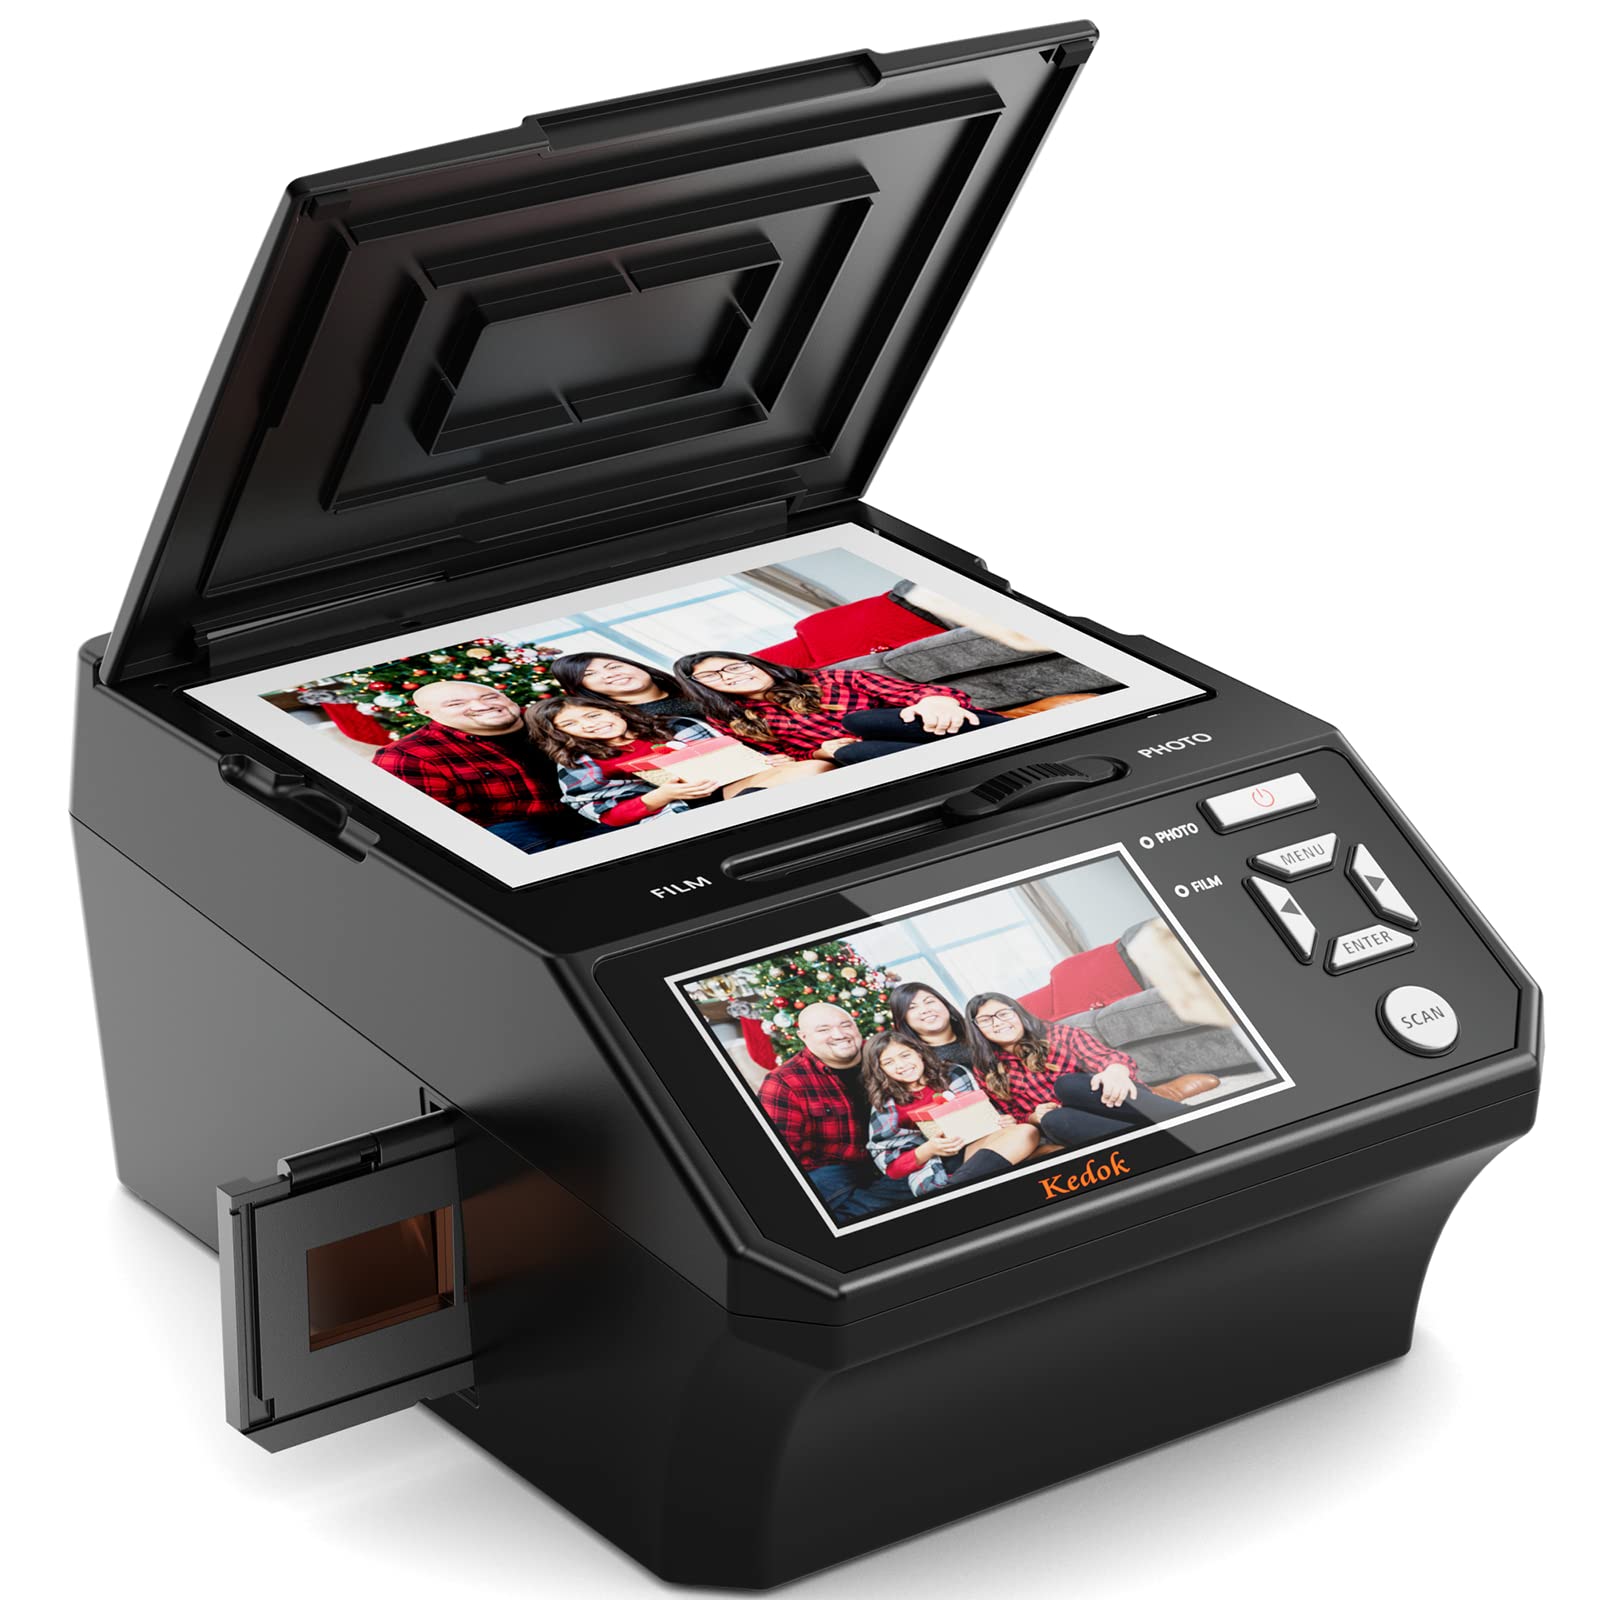 Photo,NameCard,Slide & Negative Scanner with Large 5" LCD Screen,Film and Slide Digitizer-Convert 35mm,110 Film/Photo(3R,4R,5R)/NameCard to 22MP Digital JPEG-8GB SD Card Included